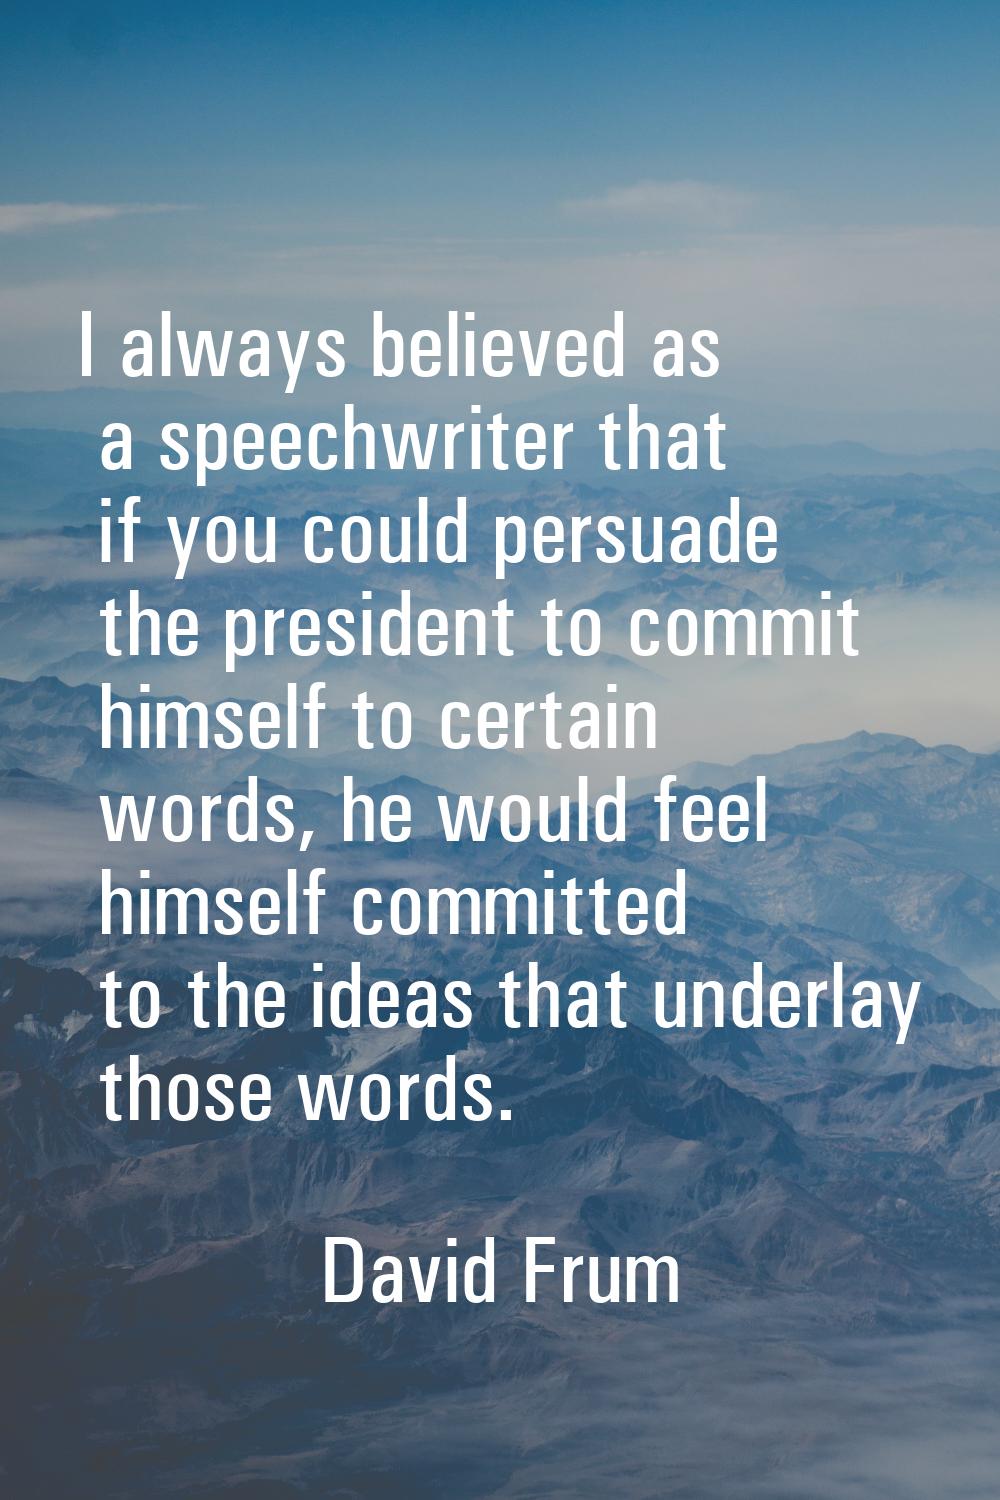 I always believed as a speechwriter that if you could persuade the president to commit himself to c